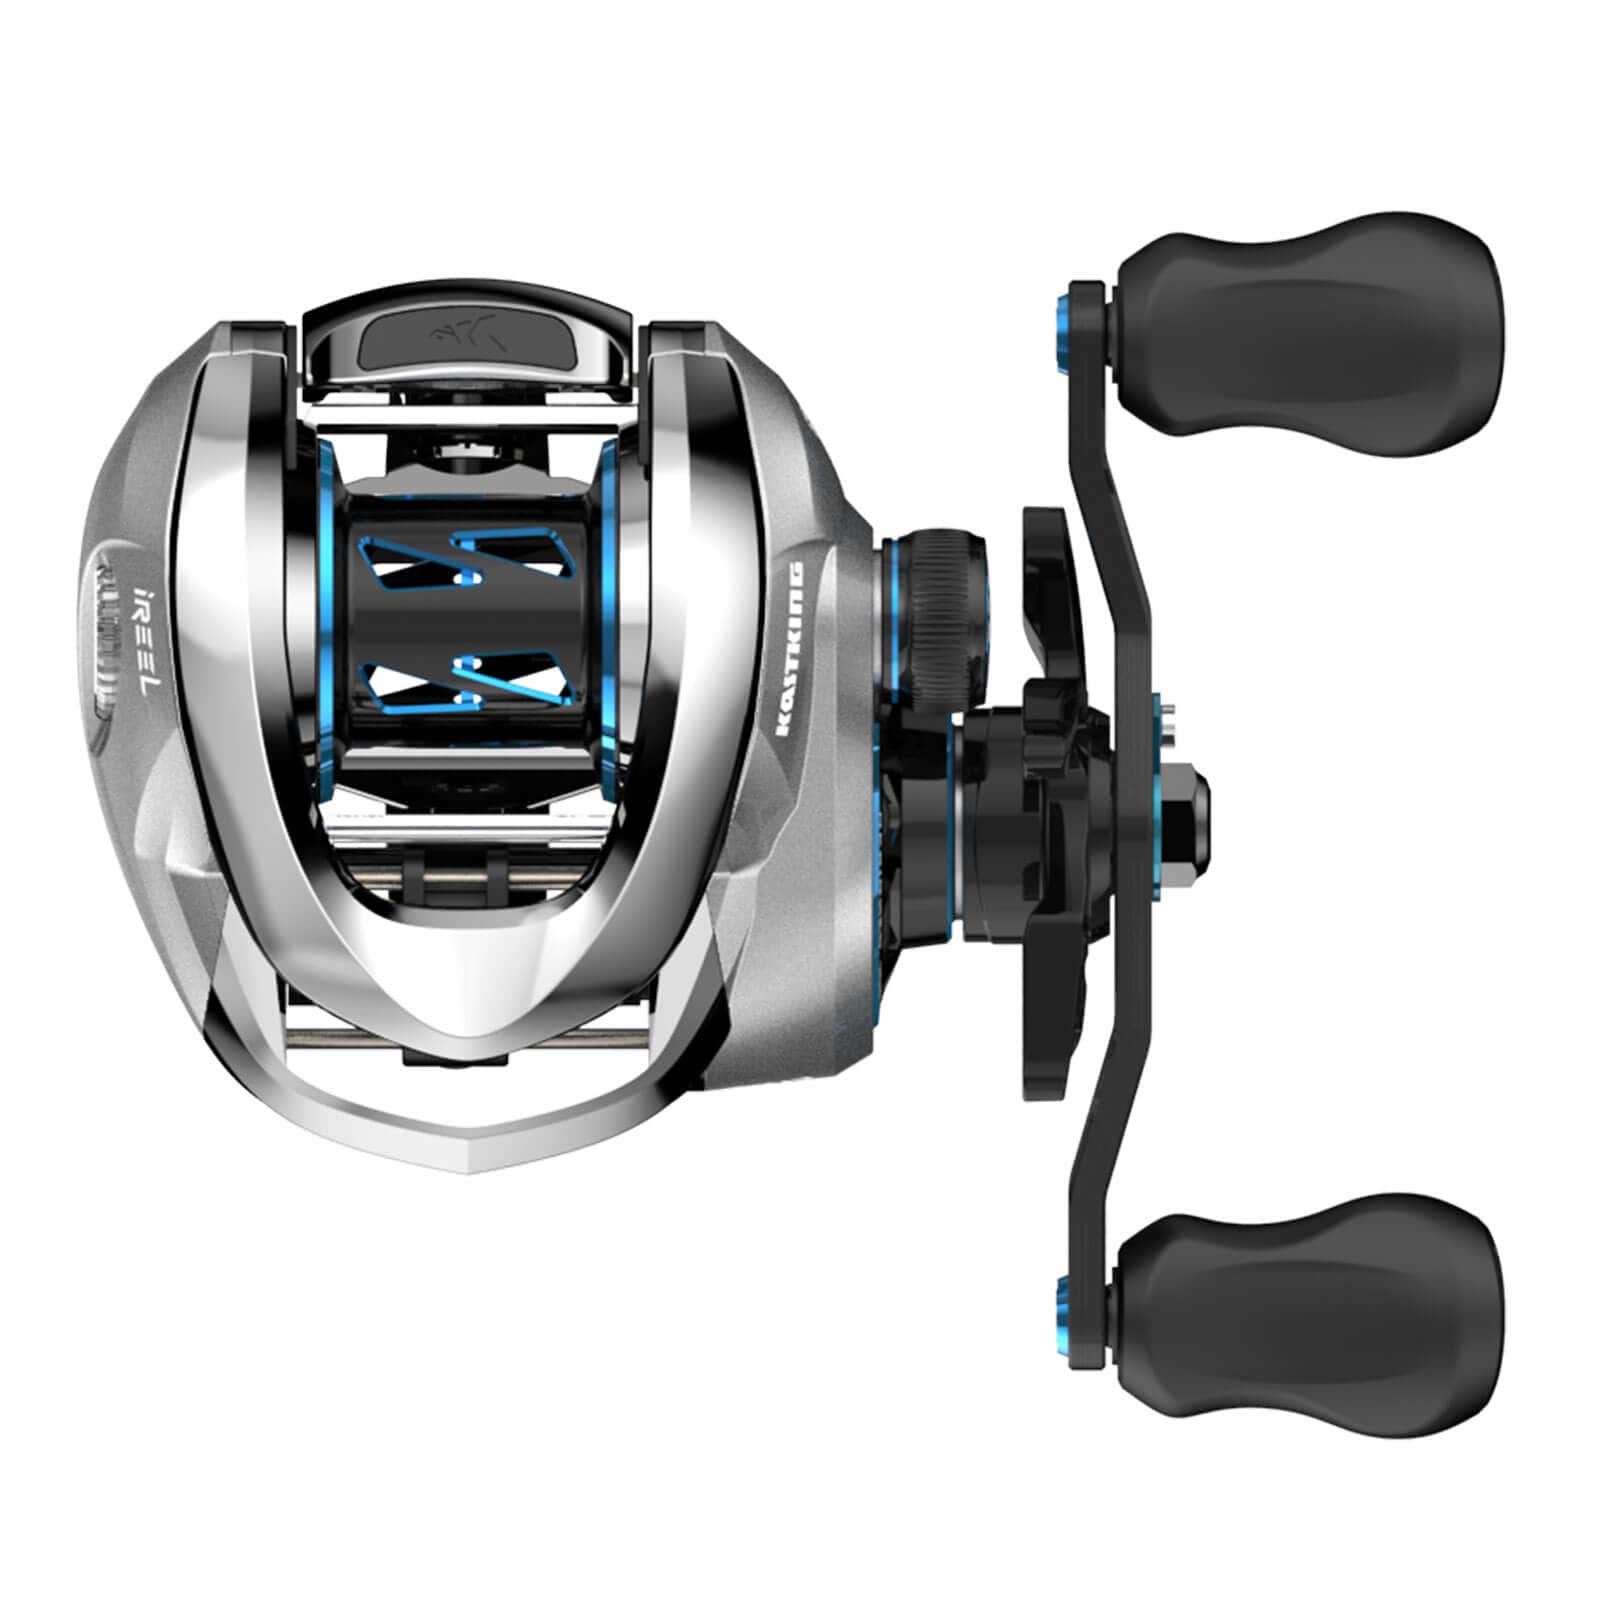 Now available for Pre-Order the KastKing iReel One AMB Smart Reel